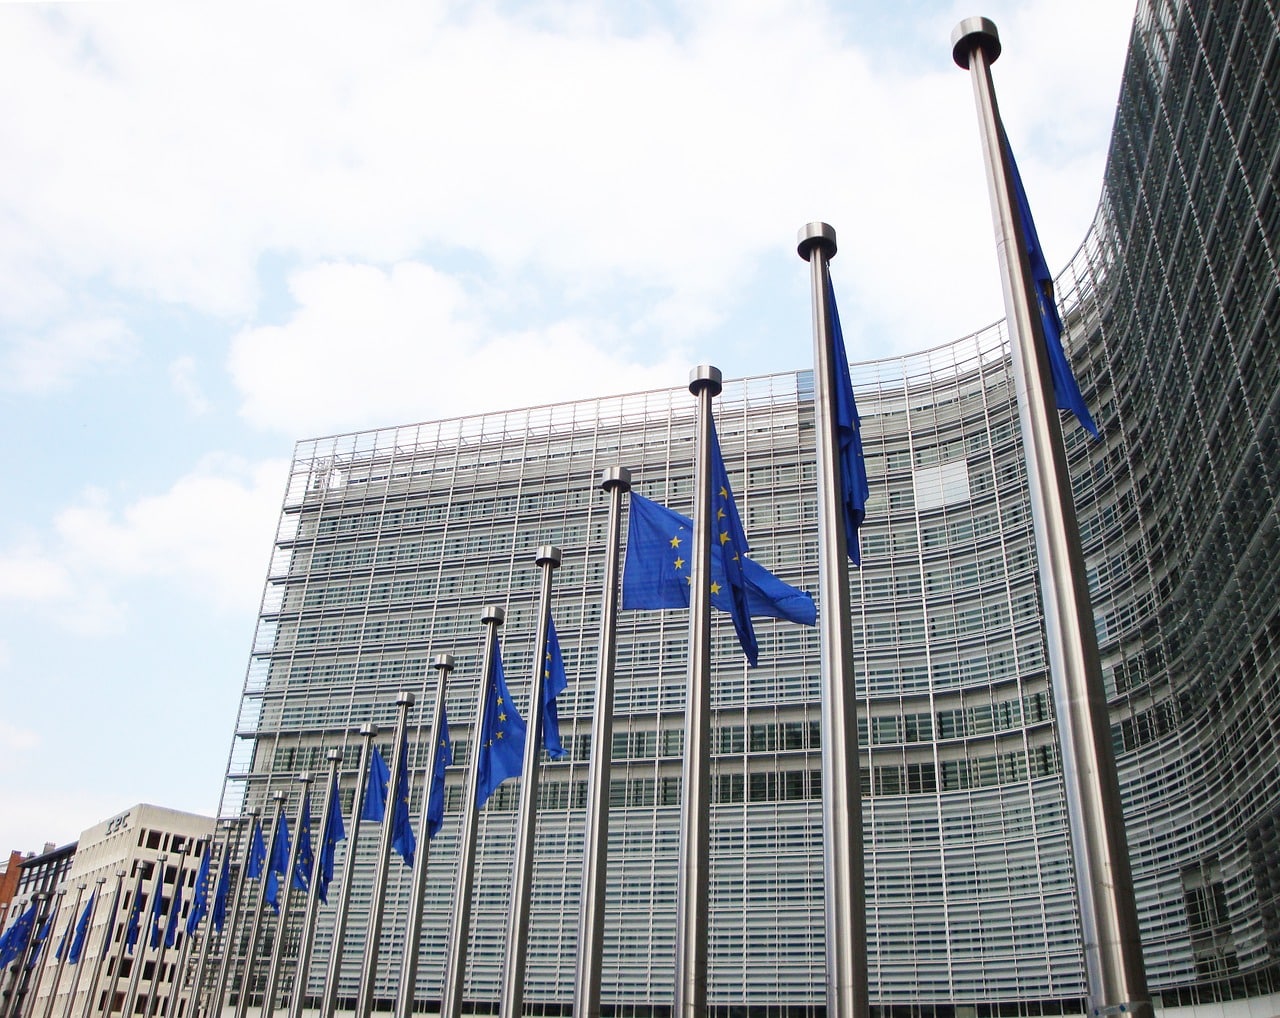 The European Commission in Brussels. Image by Jai79 on Pixabay